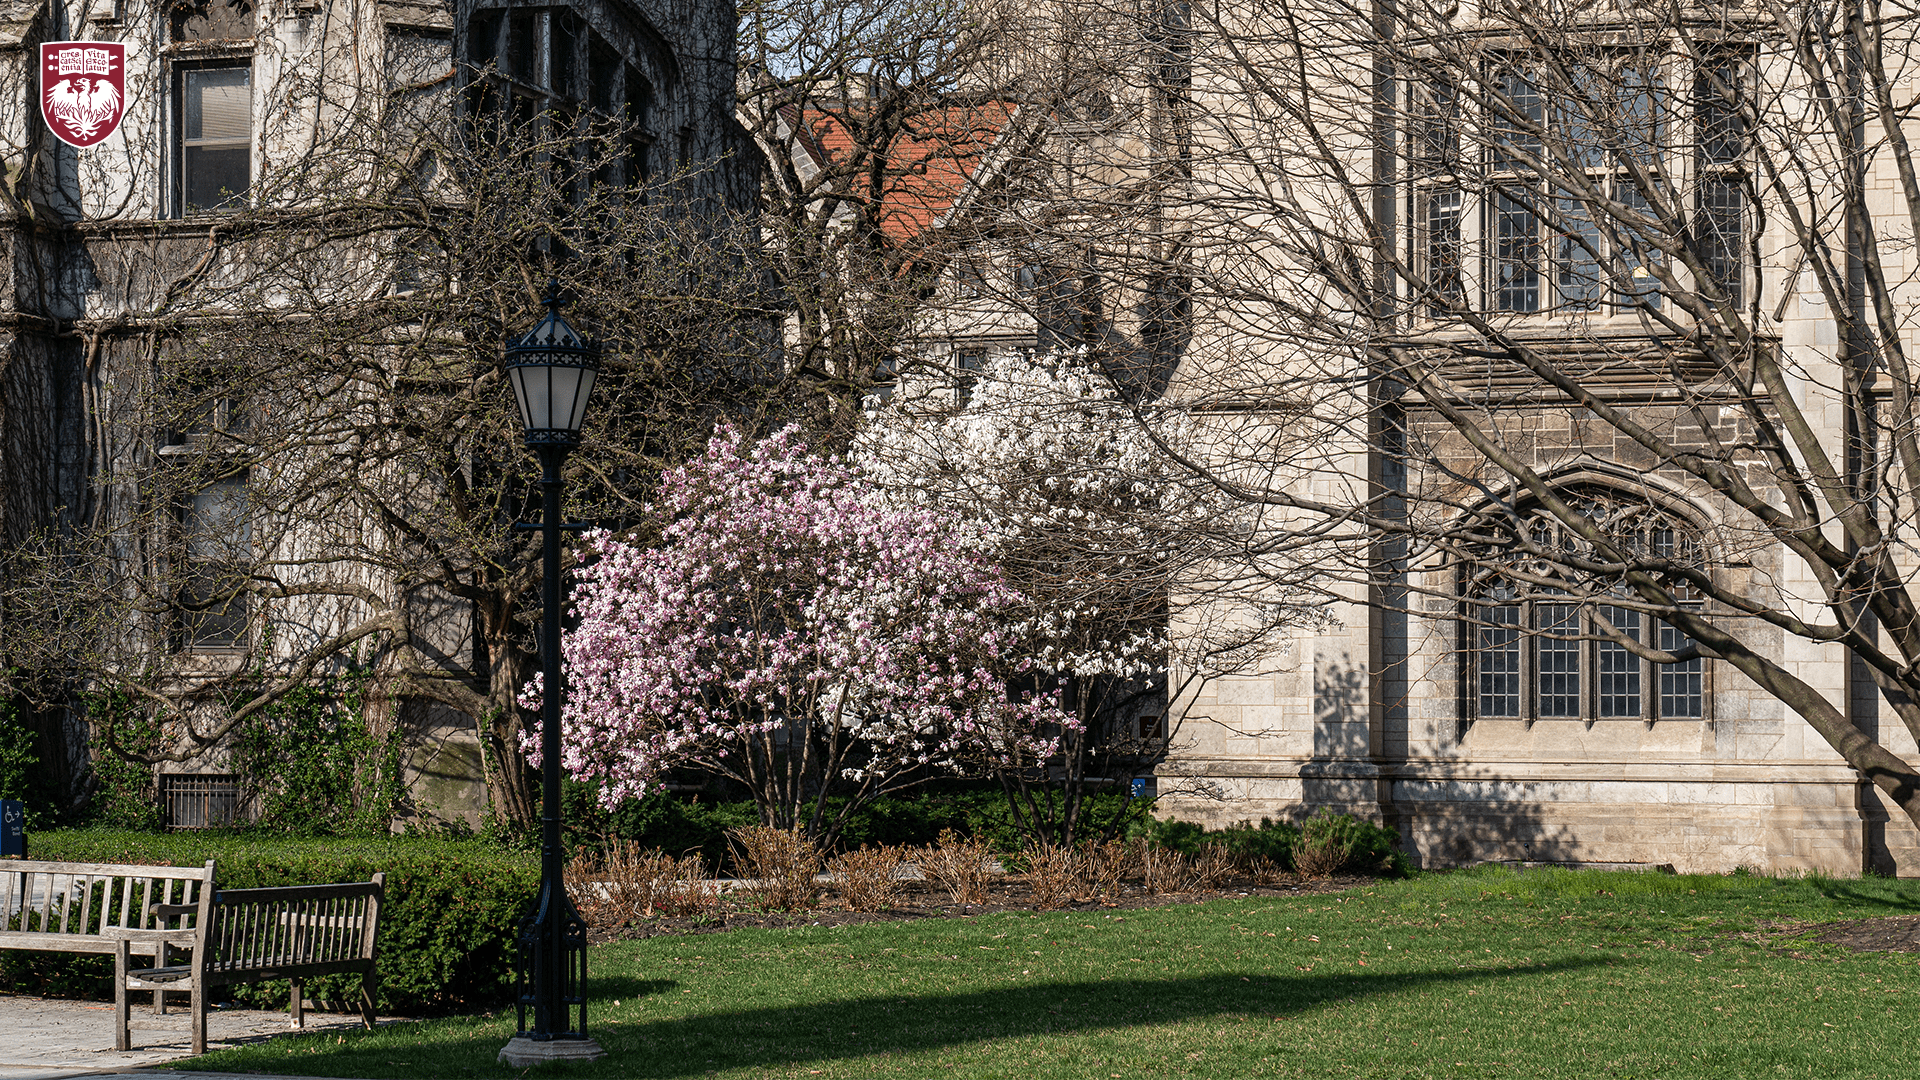 Trees with white and pink blooms on the quad